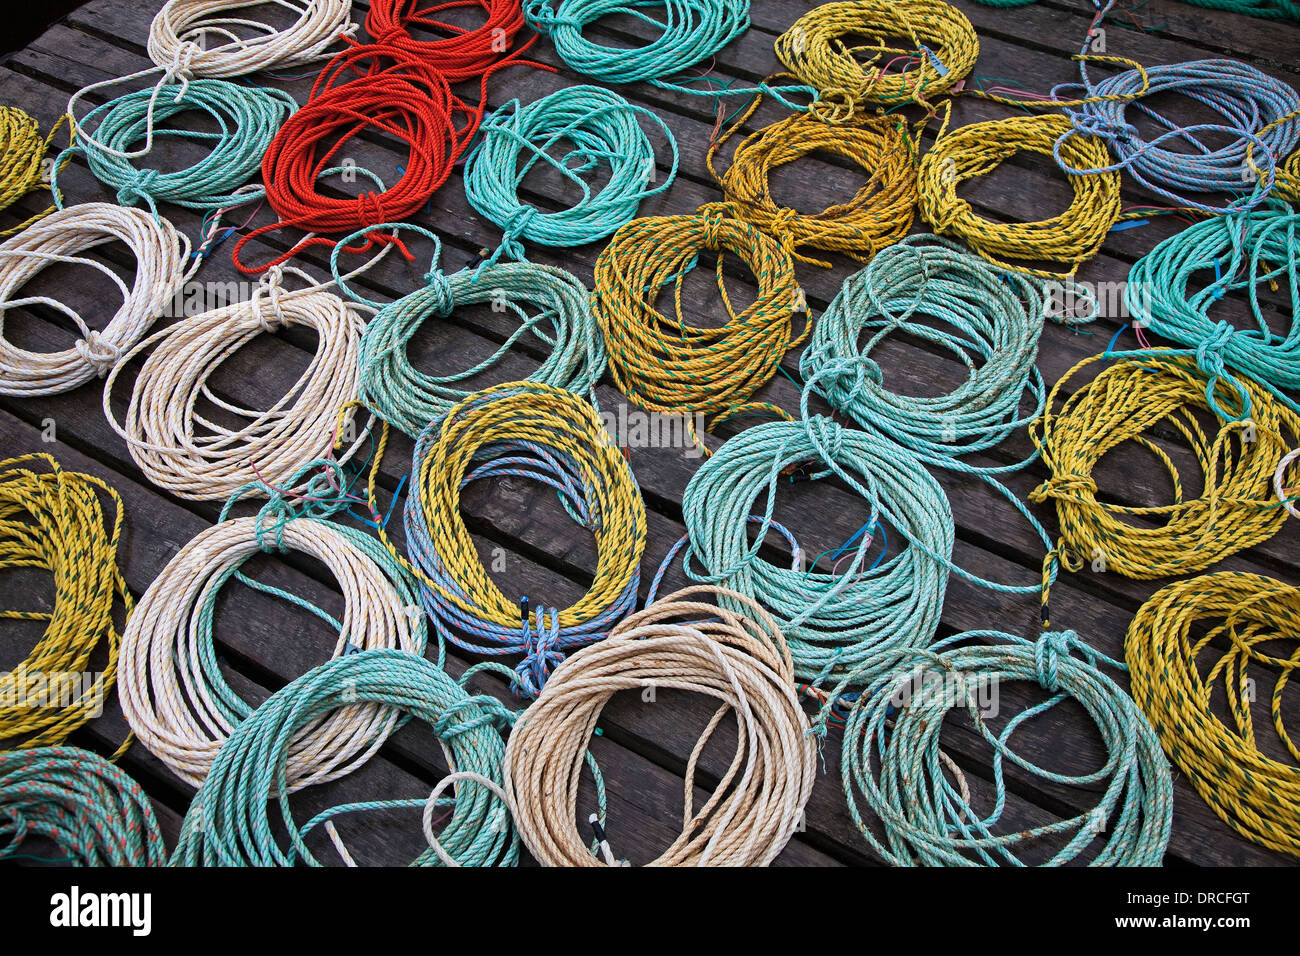 Coils of fishing rope on dock Stock Photo